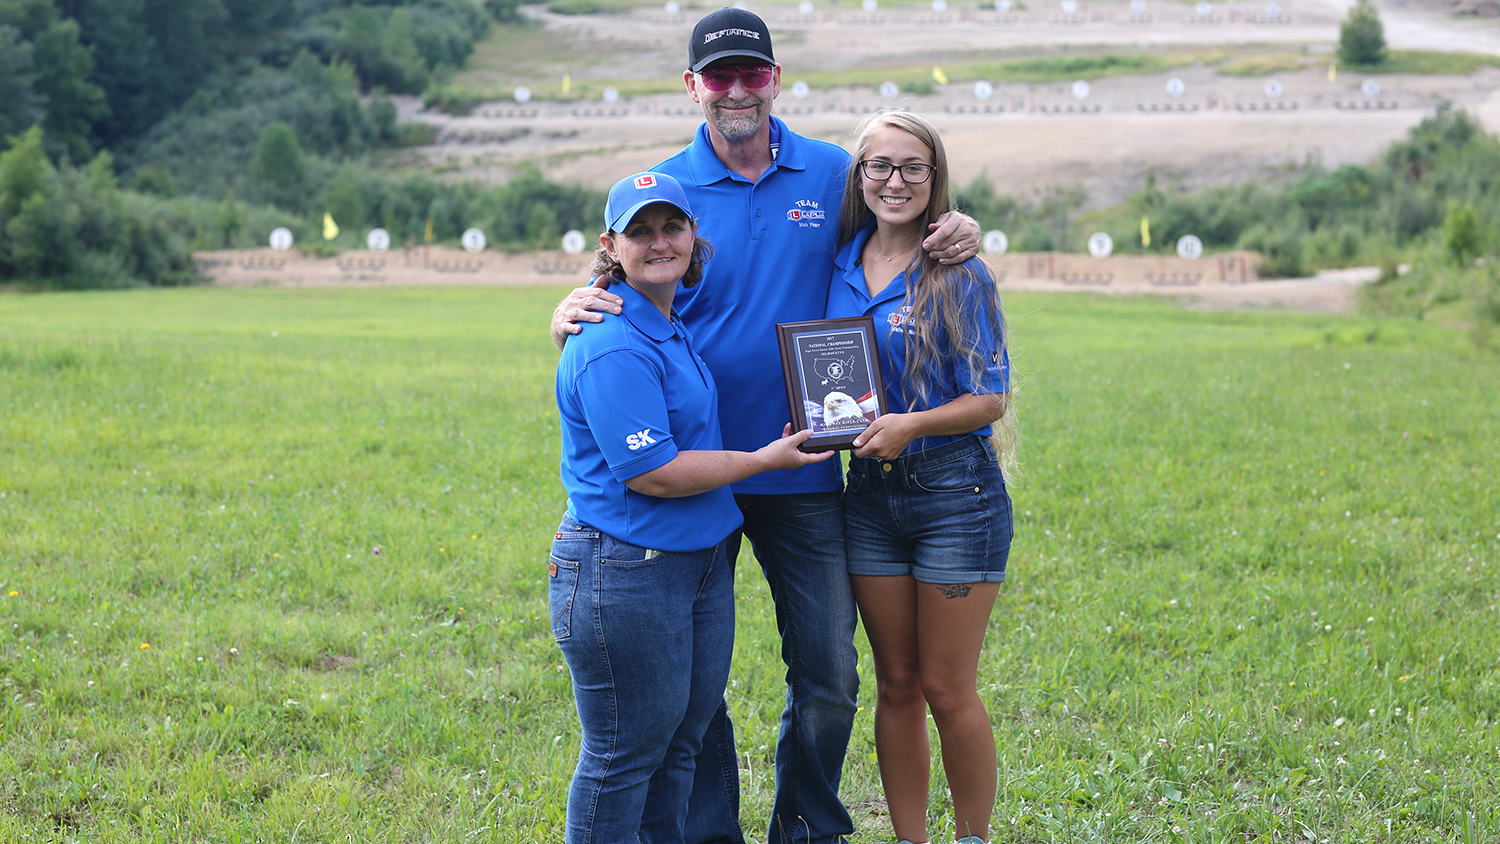 Winstead-Severin: 2017 NRA National Silhouette High Power Rifle Championships